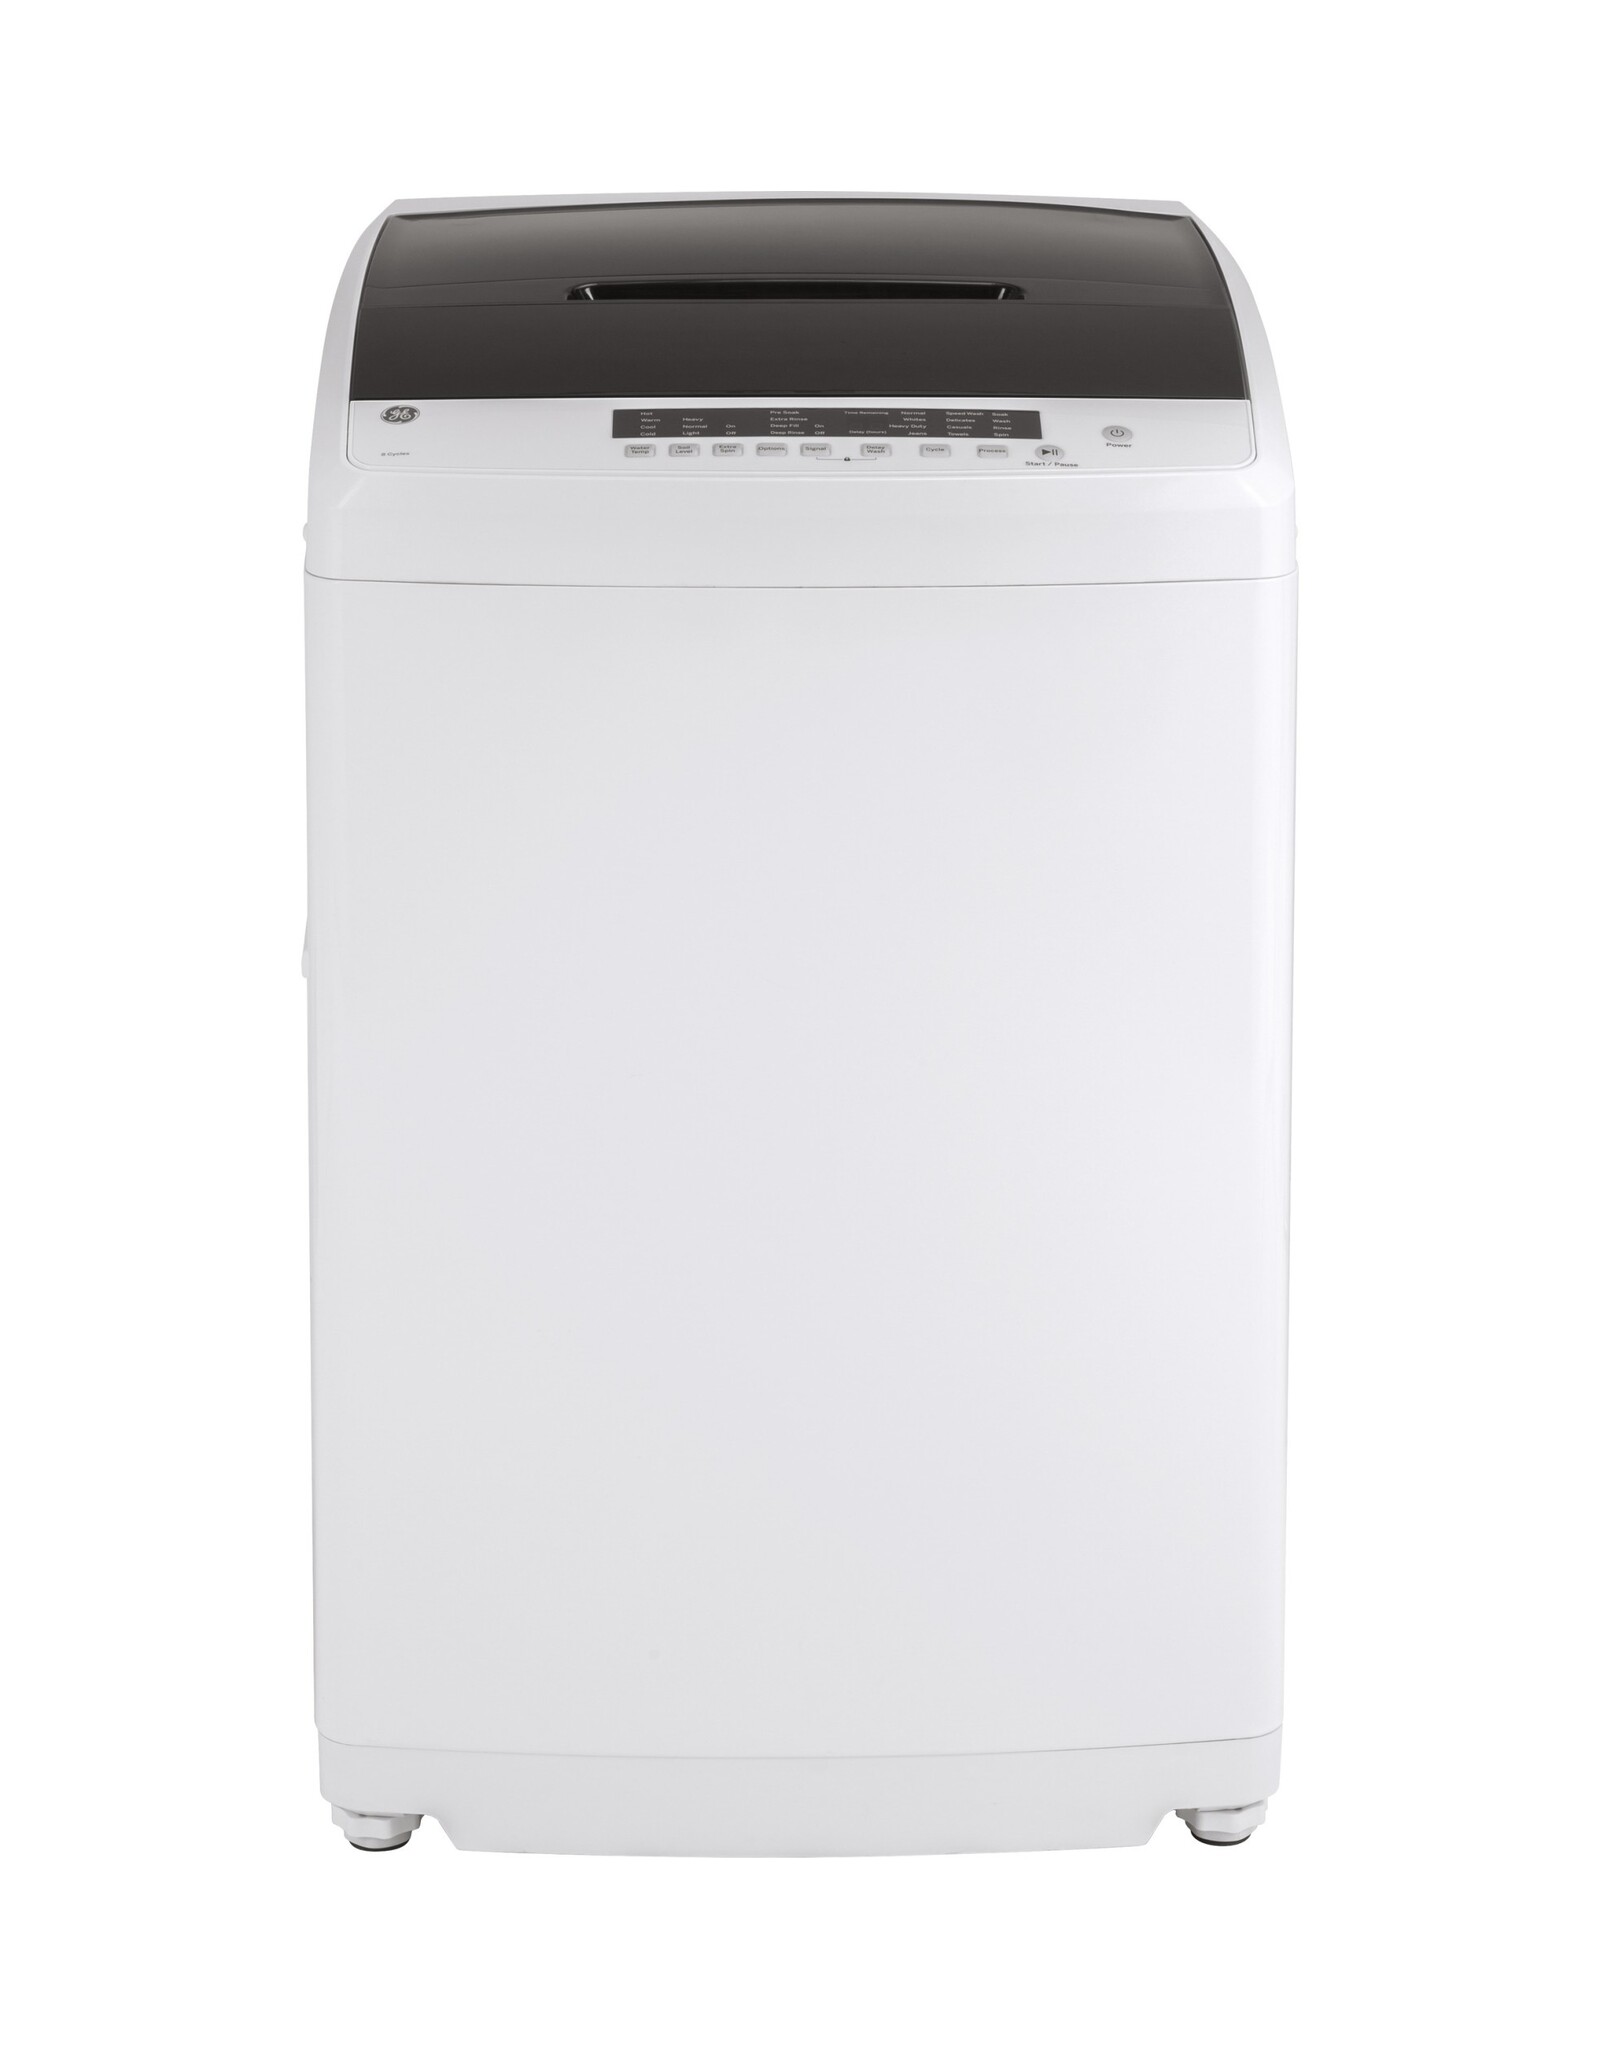 GE GNW128PSMWW GE 2.8 cu. ft. Capacity Portable Washer with Stainless Steel Basket